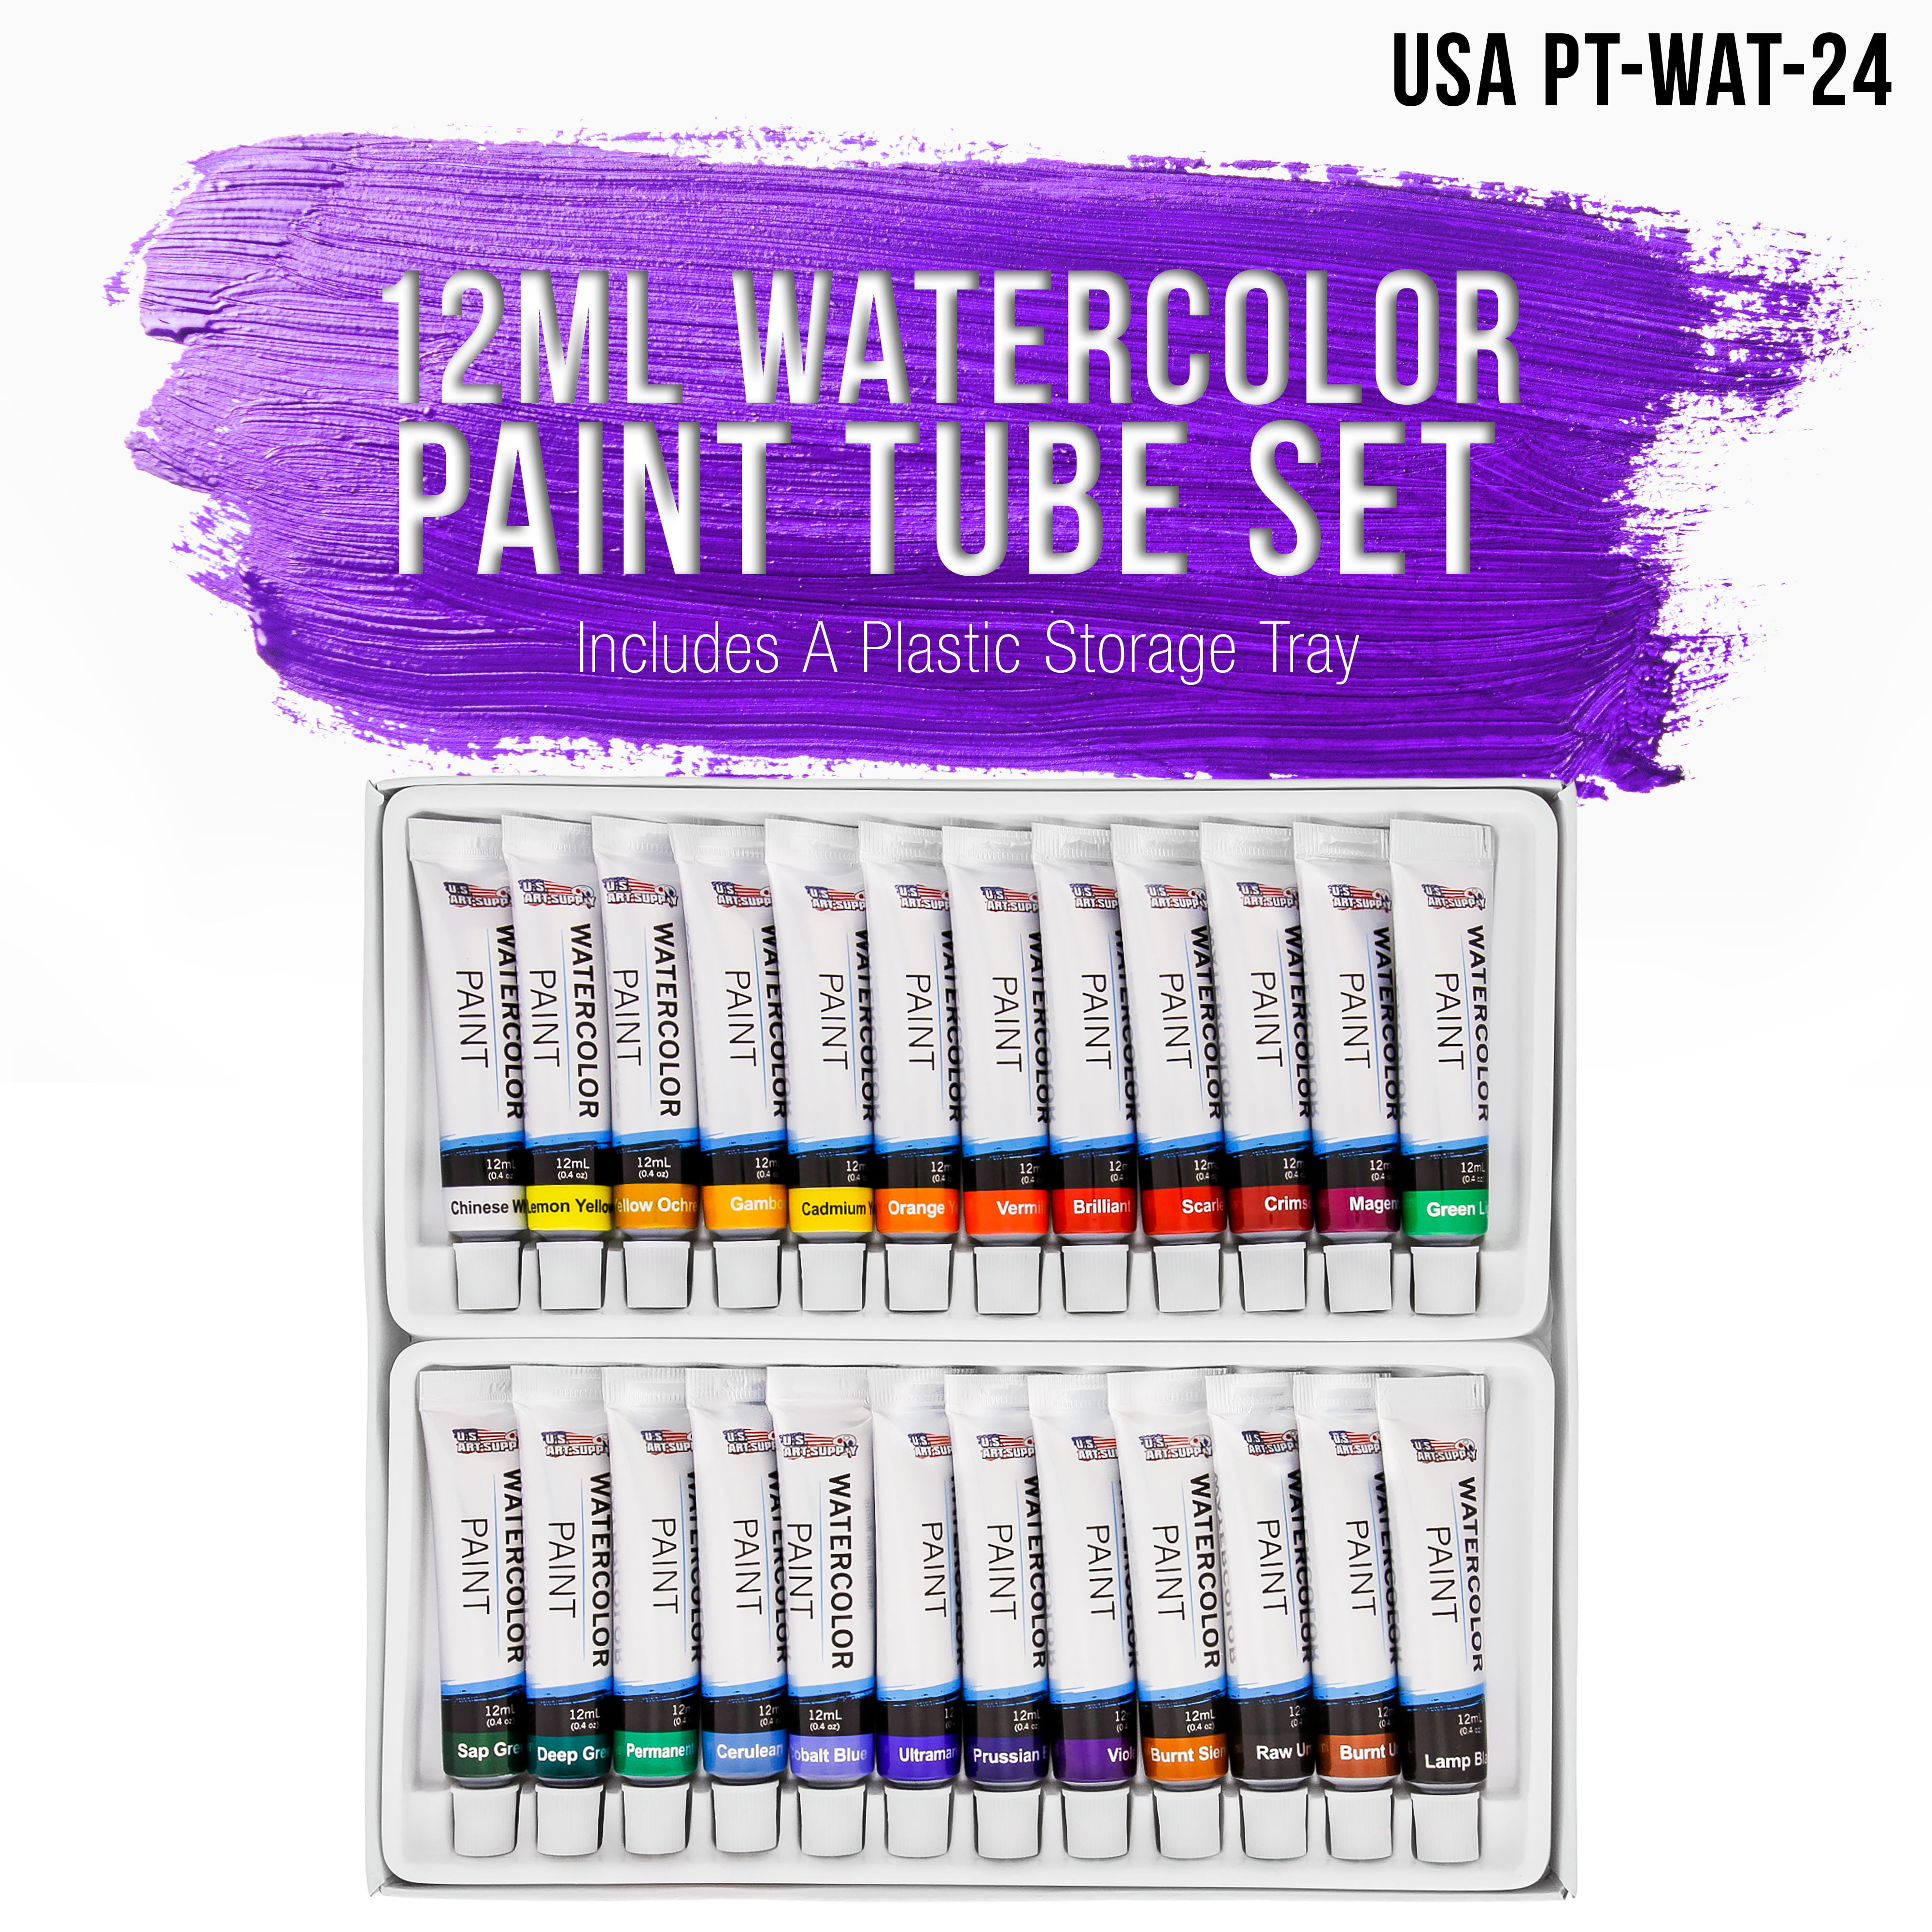 PHOENIX Watercolor Paint Set 24x12ml / 0.4 Fl Oz Tubes Non-toxic Water  Color Paints Great Value Painting Art Supplies for Adults, Kids, Artists &  Beginners